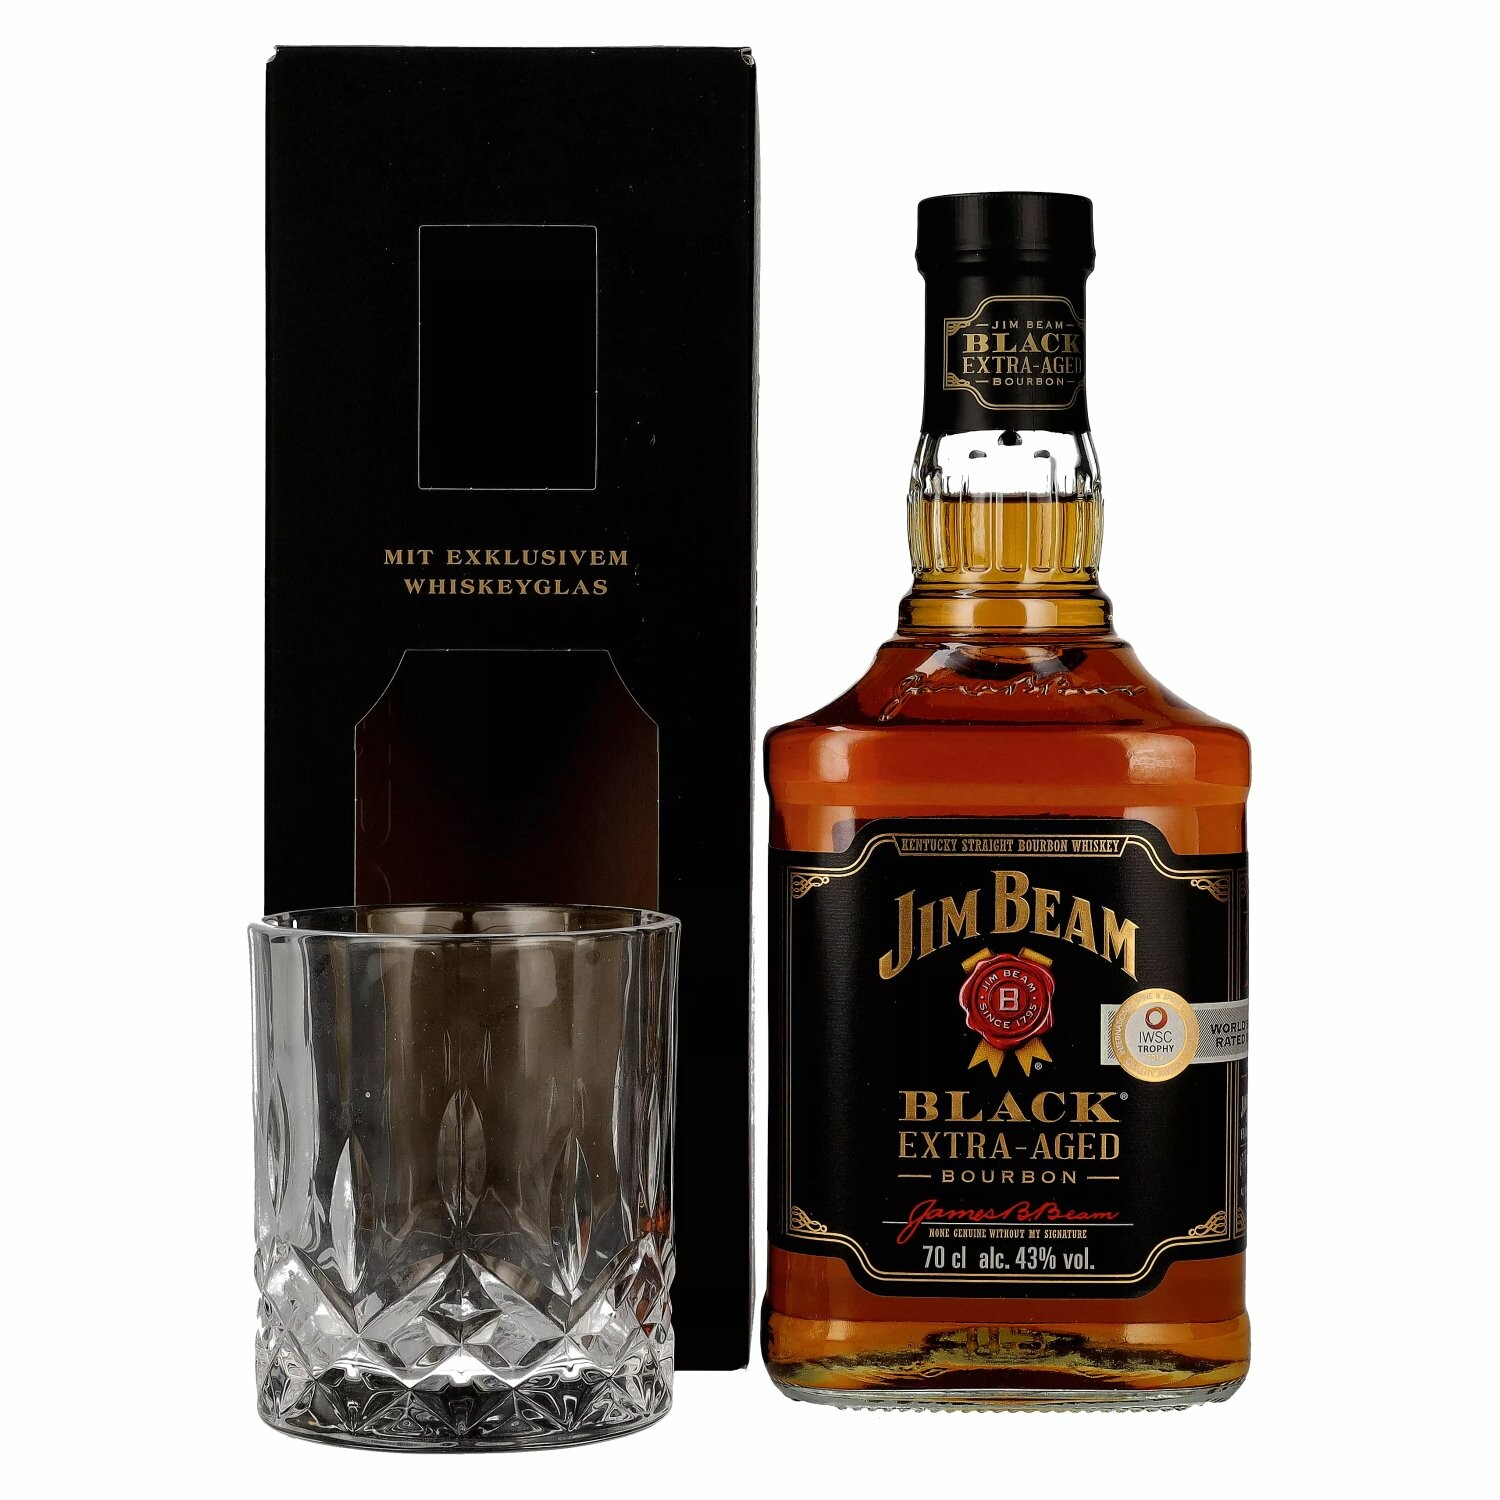 Jim Beam BLACK Extra-Aged Bourbon 43% Vol. 0,7l in Giftbox with glass